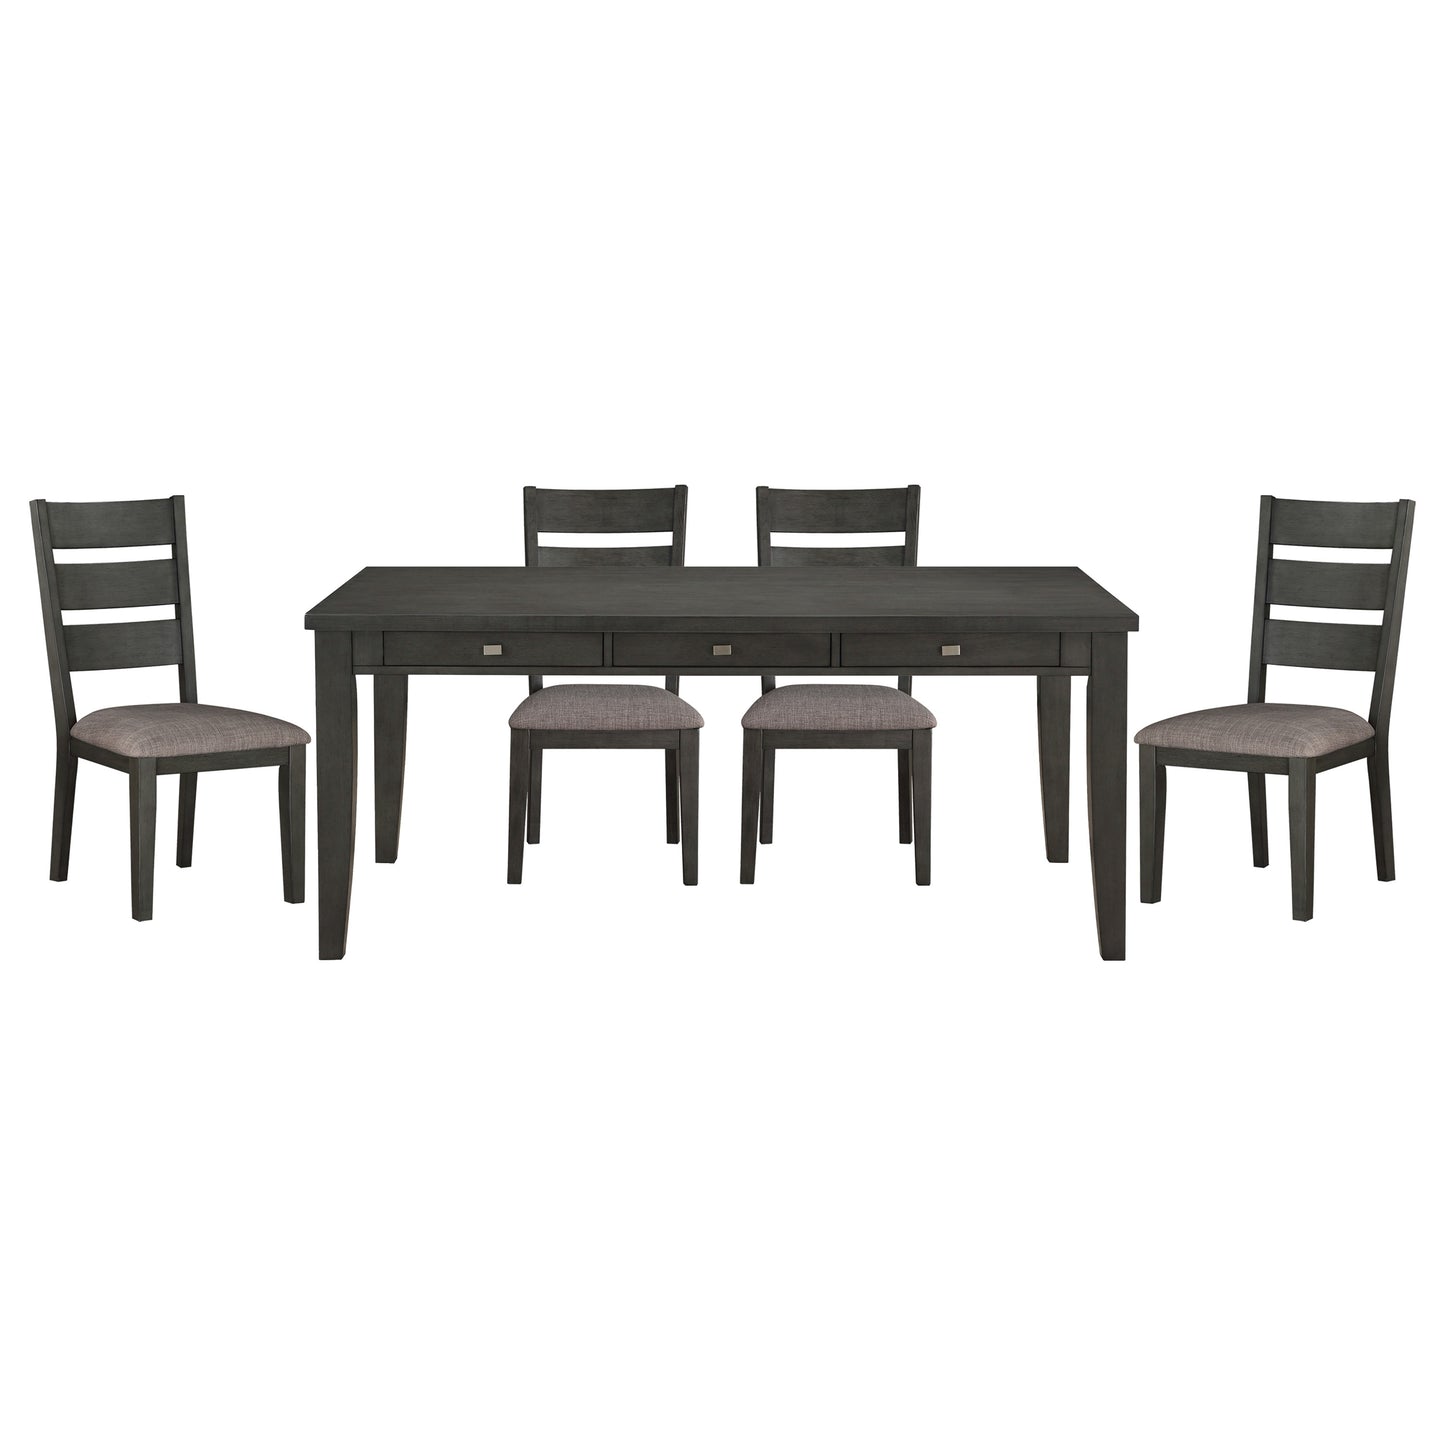 Santa Fe 6 Piece Dining Room Table Set with Bench